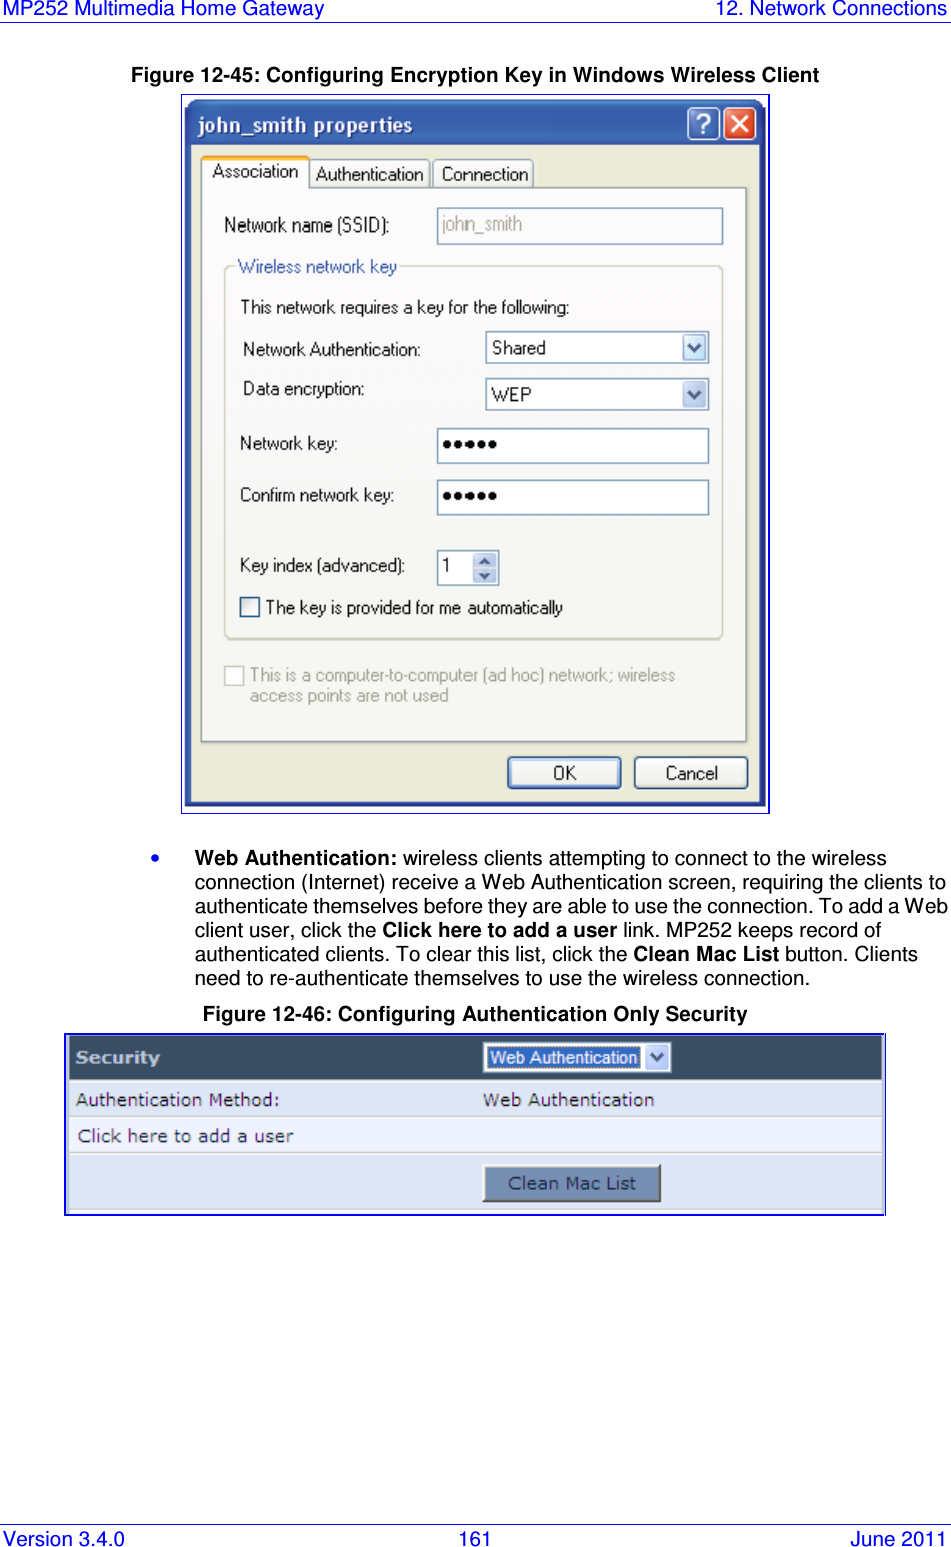 MP252 Multimedia Home Gateway  12. Network Connections Version 3.4.0  161  June 2011 Figure 12-45: Configuring Encryption Key in Windows Wireless Client  • Web Authentication: wireless clients attempting to connect to the wireless connection (Internet) receive a Web Authentication screen, requiring the clients to authenticate themselves before they are able to use the connection. To add a Web client user, click the Click here to add a user link. MP252 keeps record of authenticated clients. To clear this list, click the Clean Mac List button. Clients need to re-authenticate themselves to use the wireless connection. Figure 12-46: Configuring Authentication Only Security   